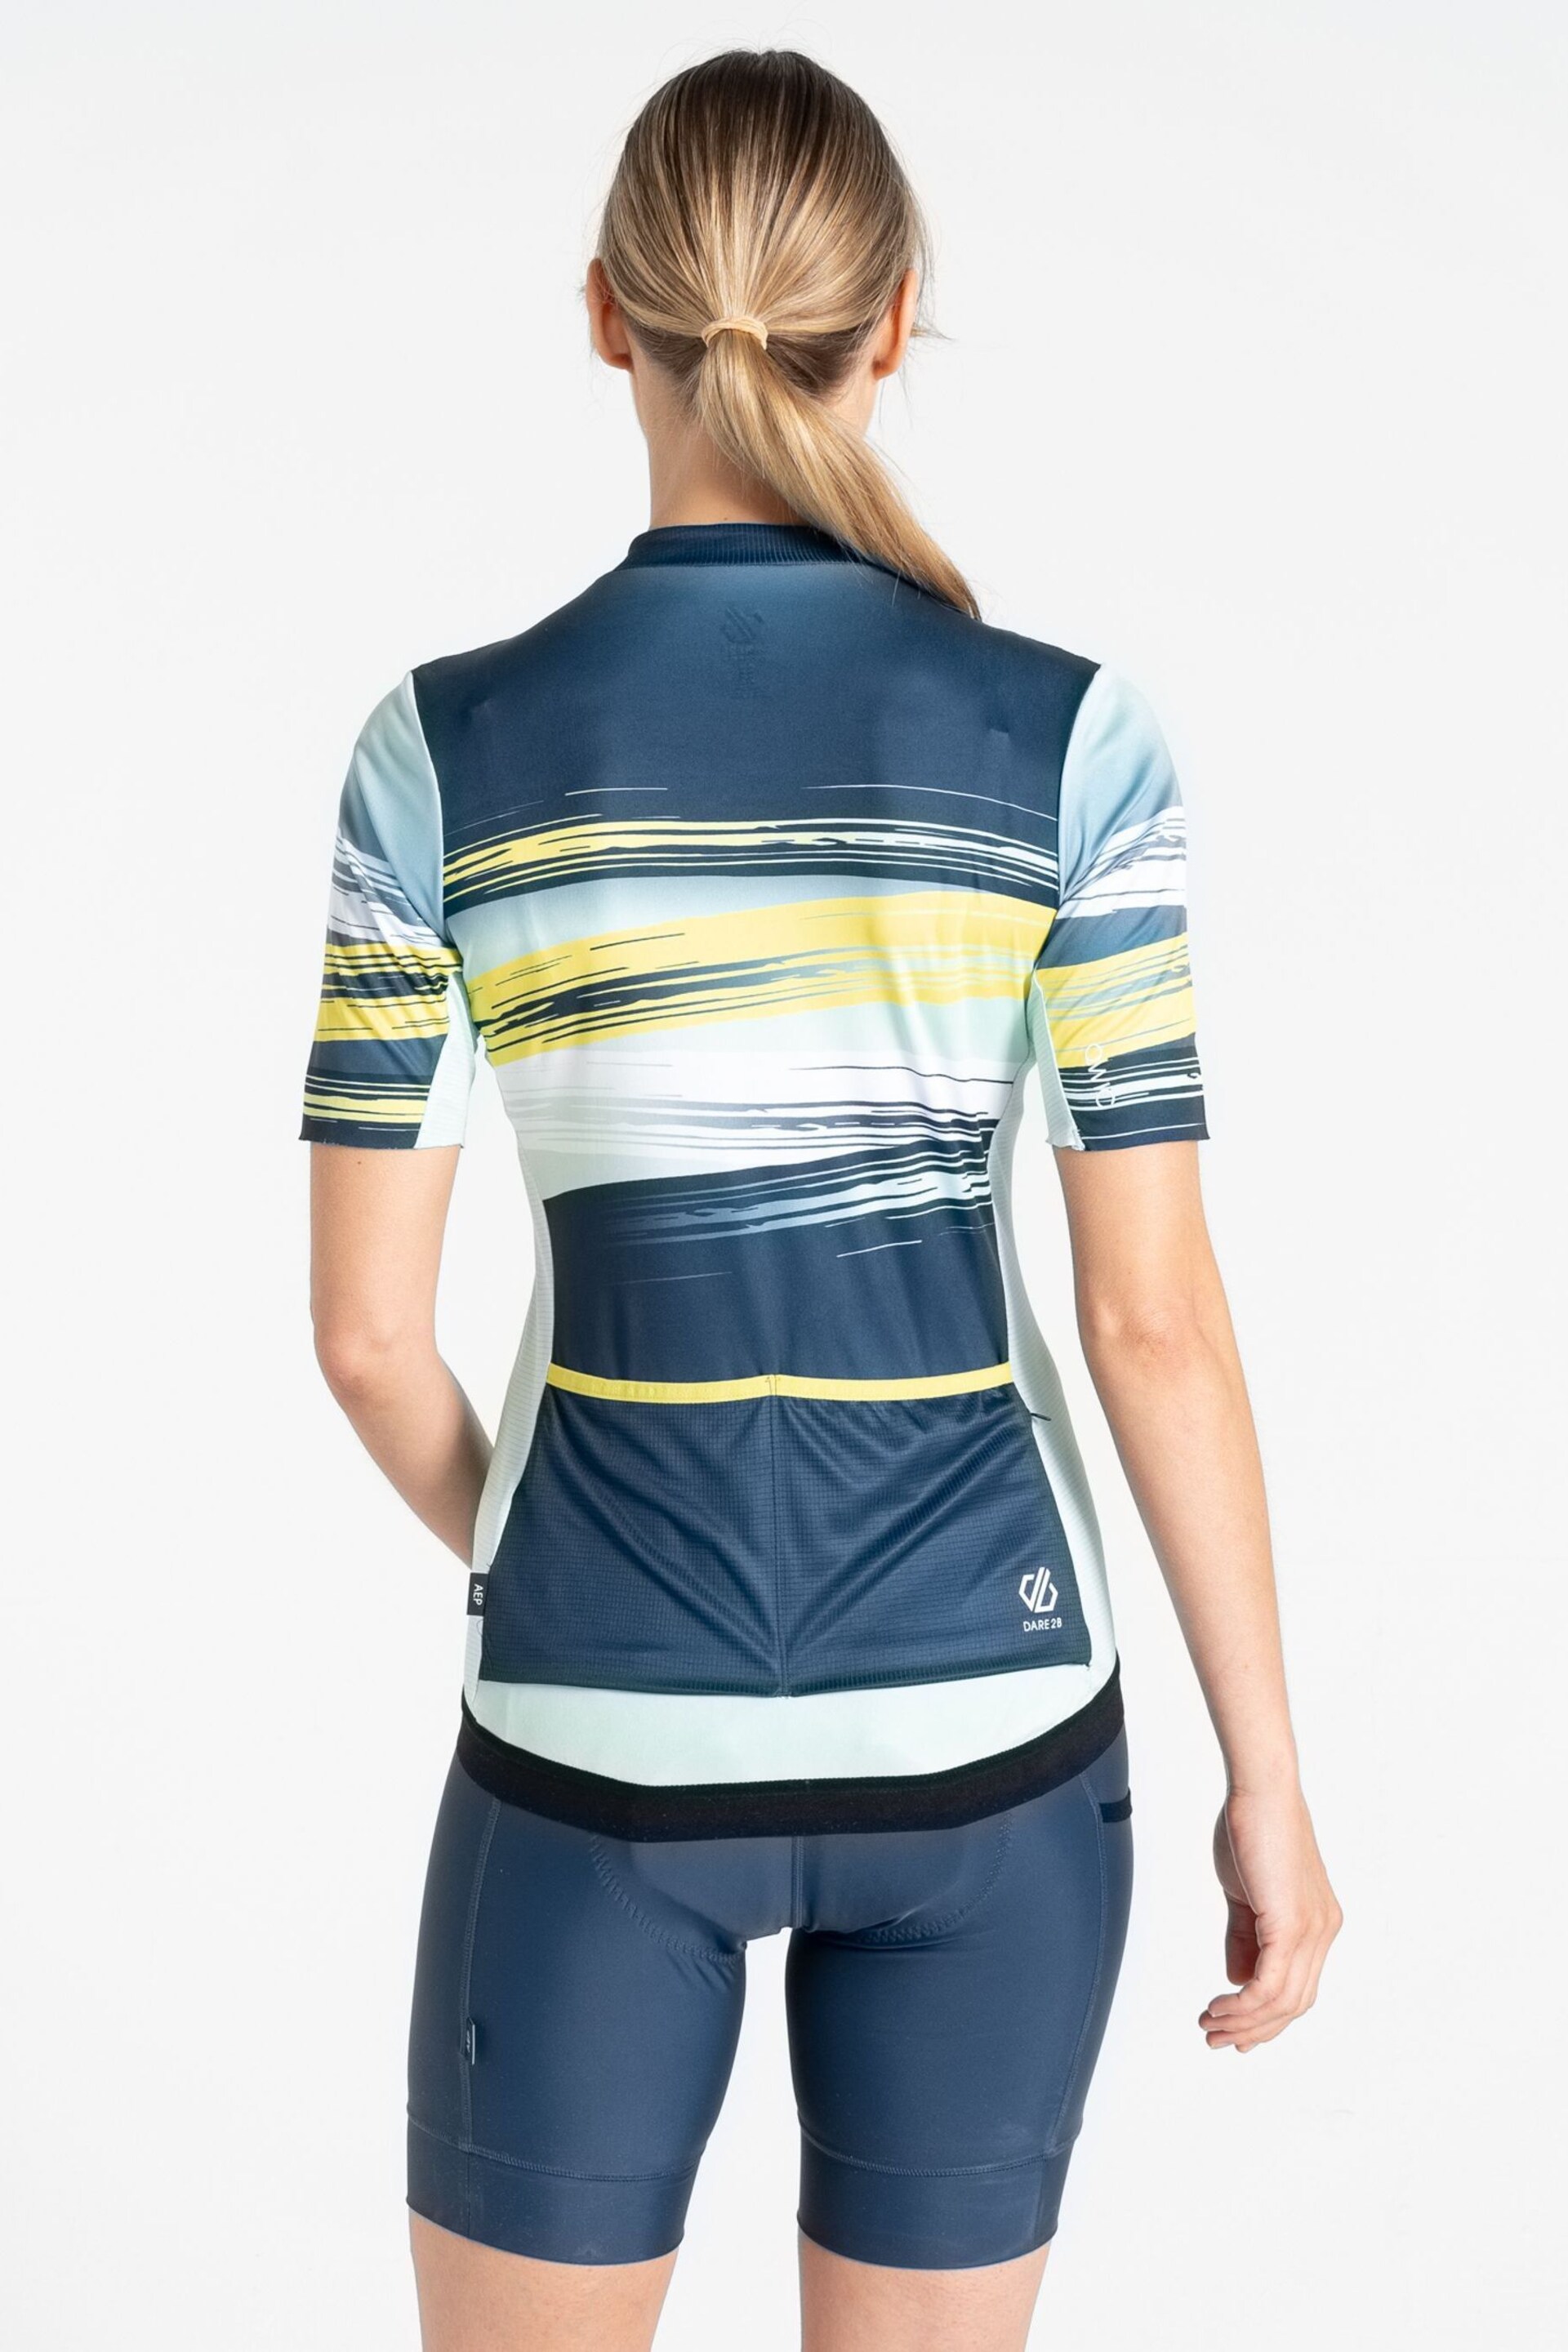 Dare 2b Green AEP Stimulus Cycle Jersey - Image 3 of 5